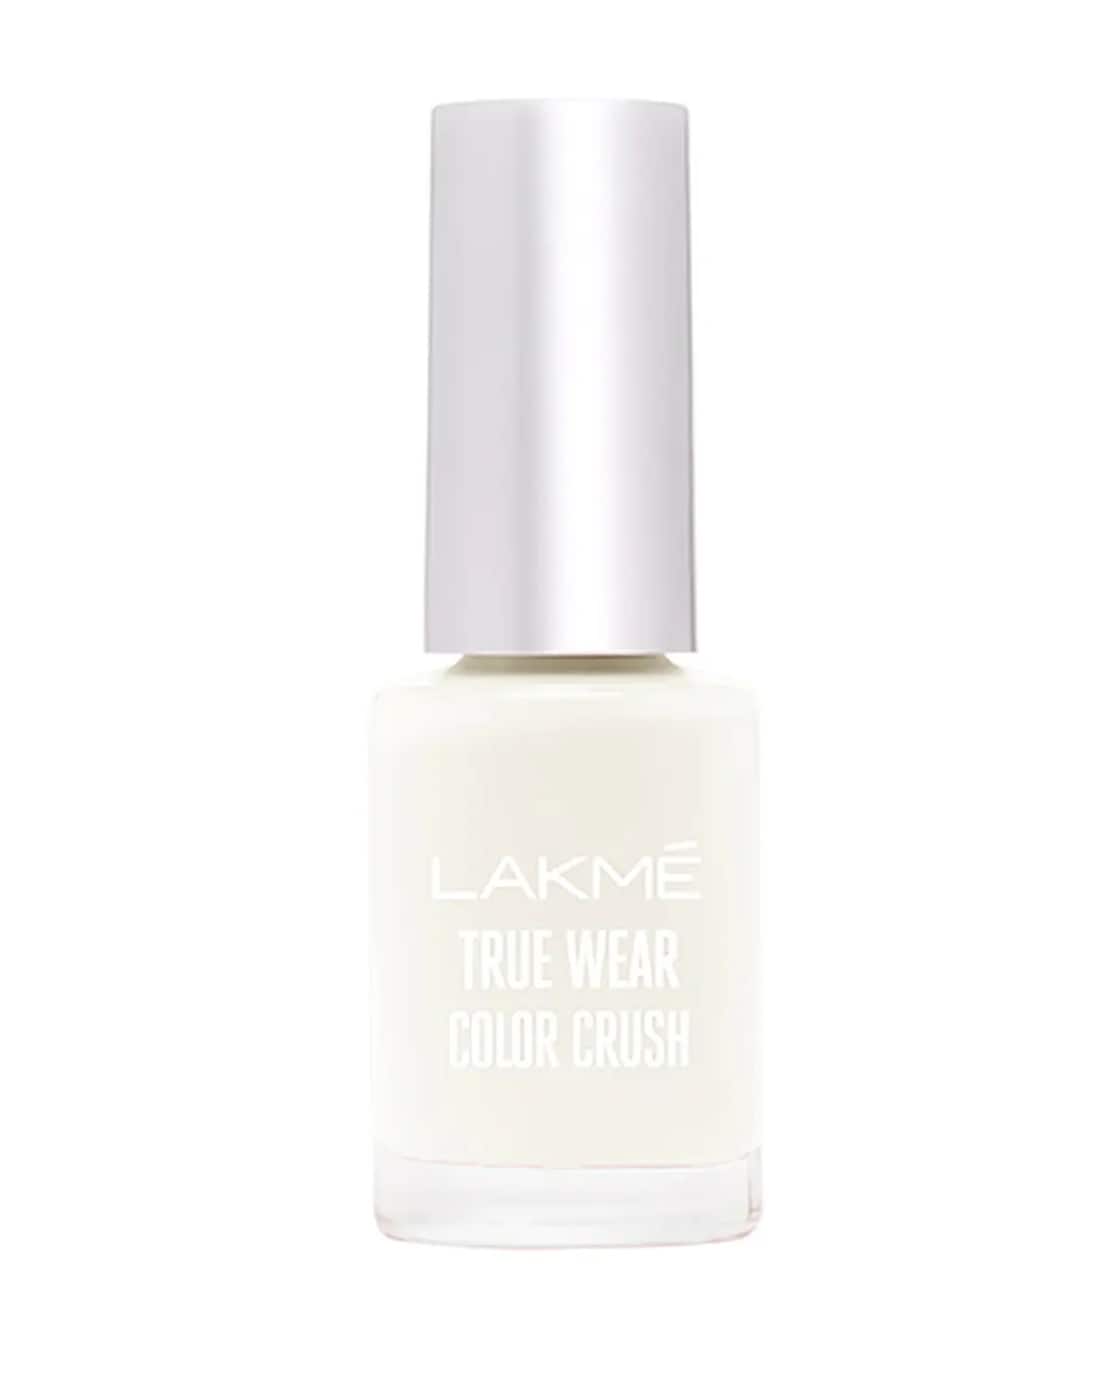 I Love Lakme - What we mean when we say, 